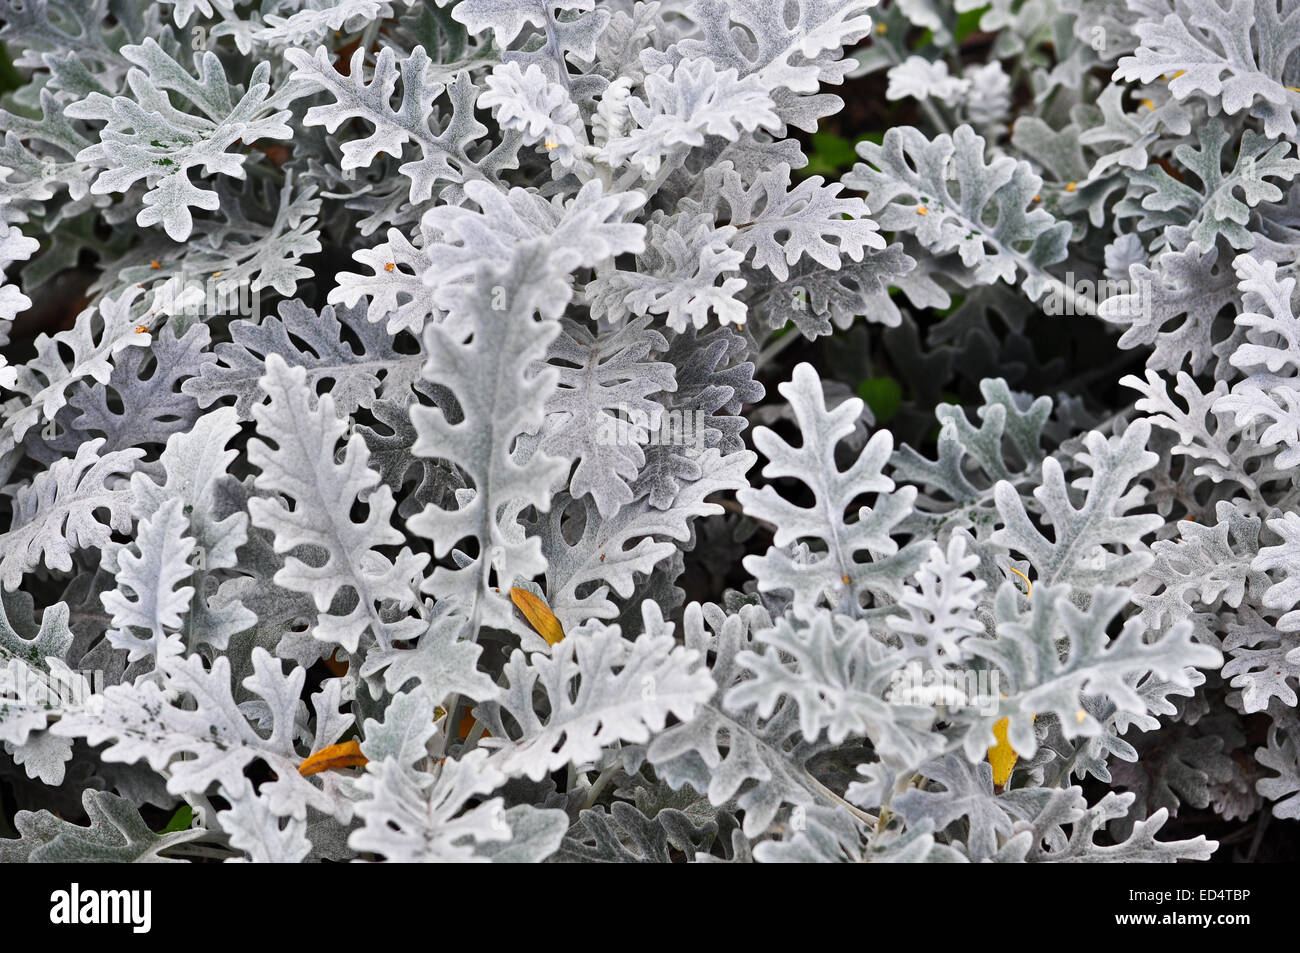 Abstract background with decorative leaves. Colorless image fancy leaves of ornamental plants in the flowerbed. Stock Photo